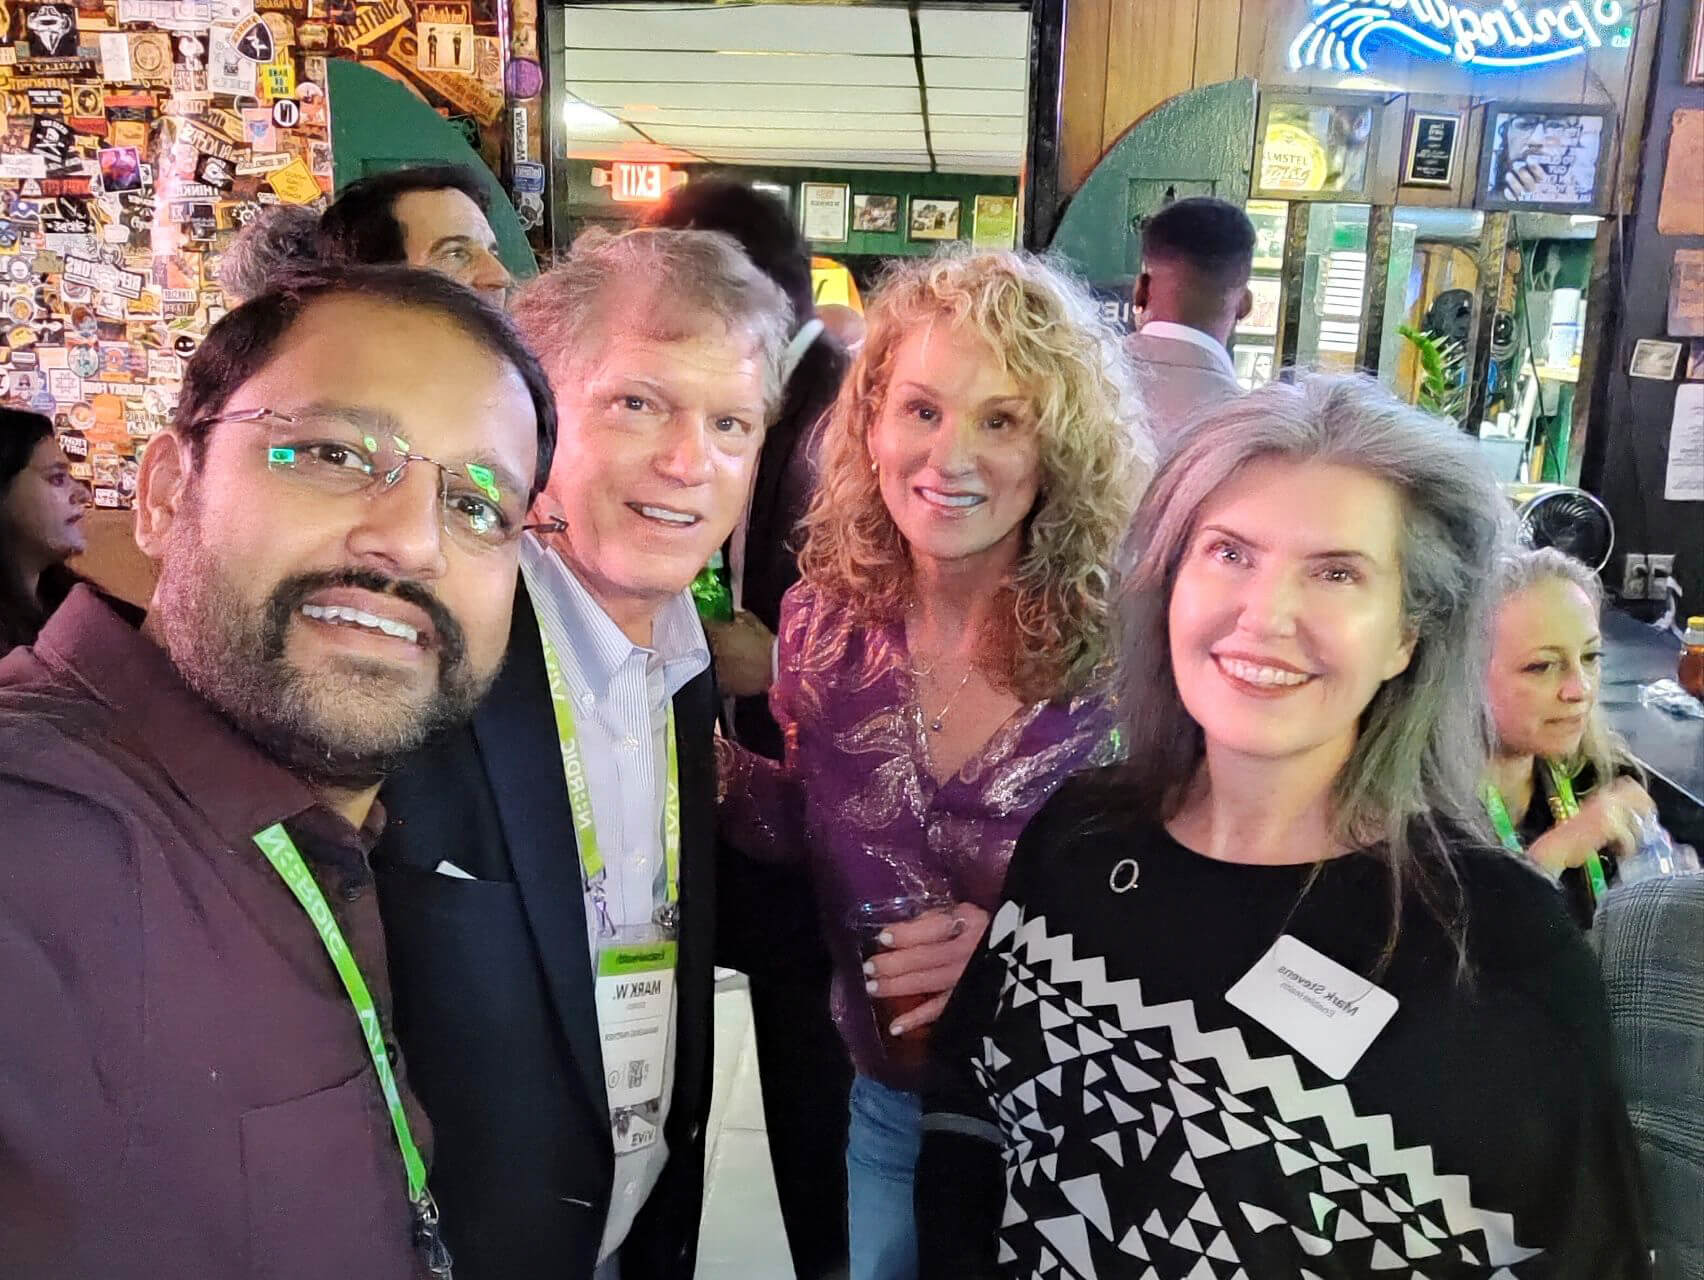 Thehealthcare360 at ViVE 2023 event in Nashville, TN, Music City Center, USA - Tejas Deshmukh, #clair360 - With Jamey Edwards at the StartUp Health pavilion! #vive2023
Some great start-ups are in their portfolio.
#health #startup